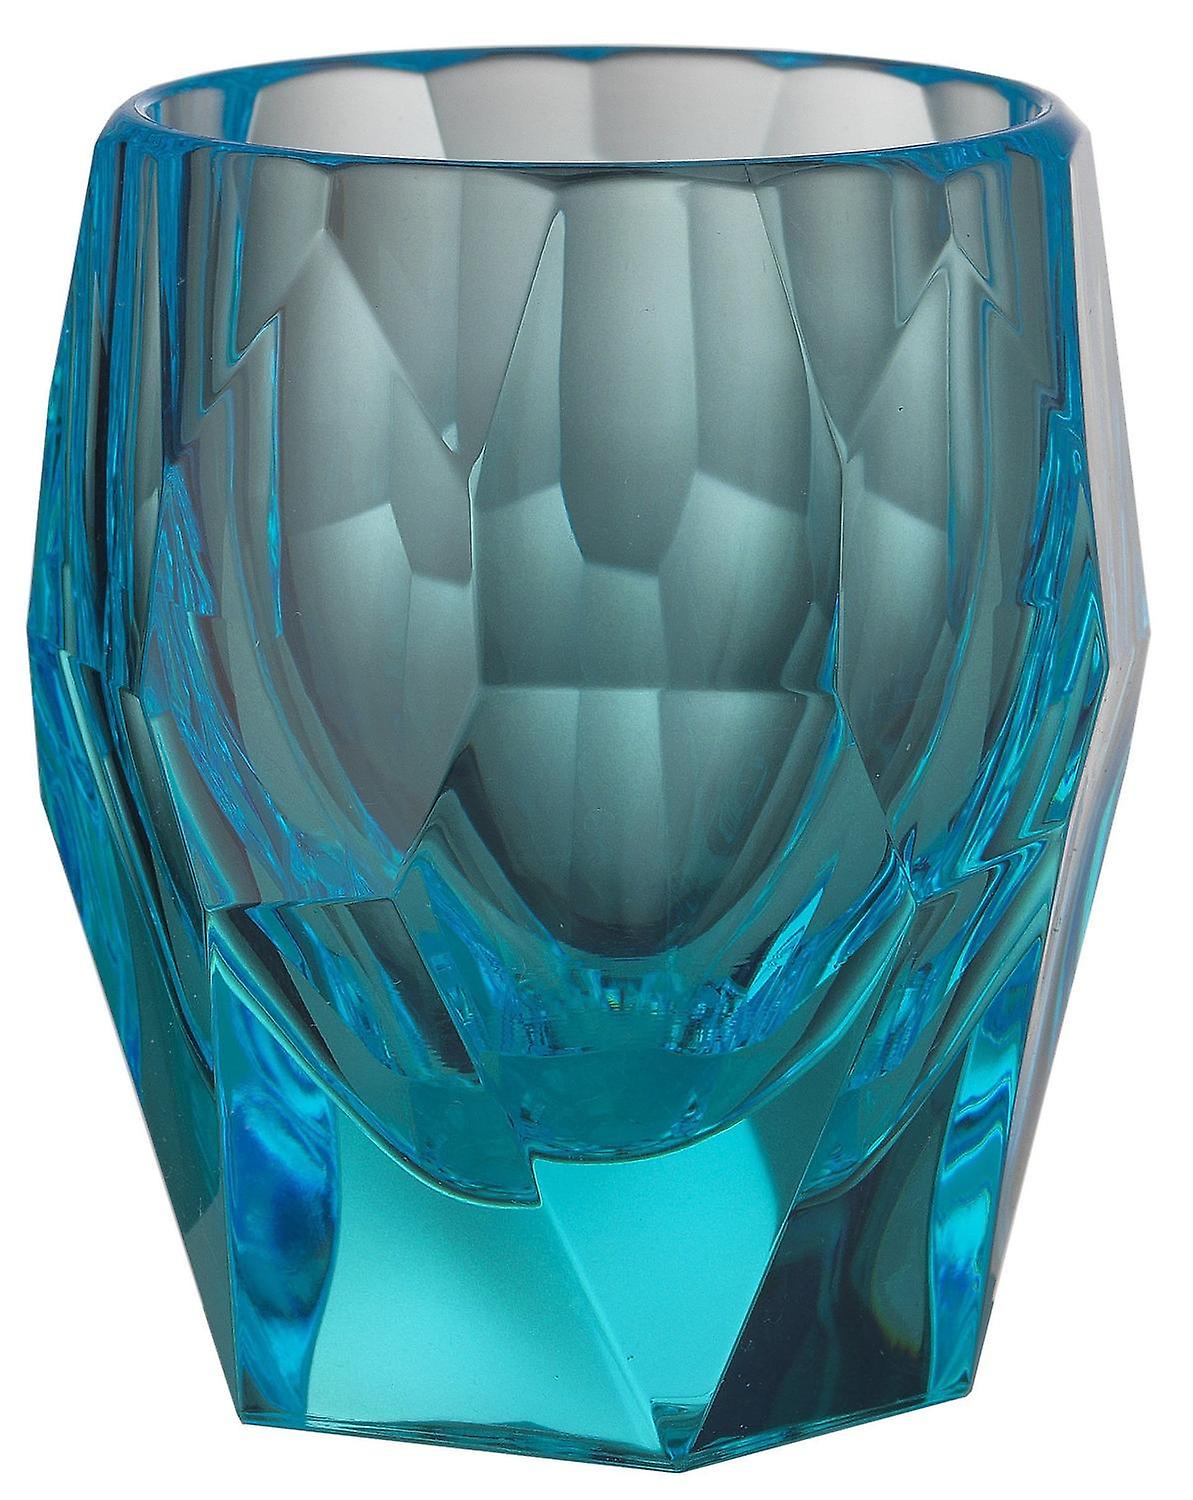 TUMBLER SUPER MILLY TURQUOISE - WINE GLASS  - PACK OF SIX